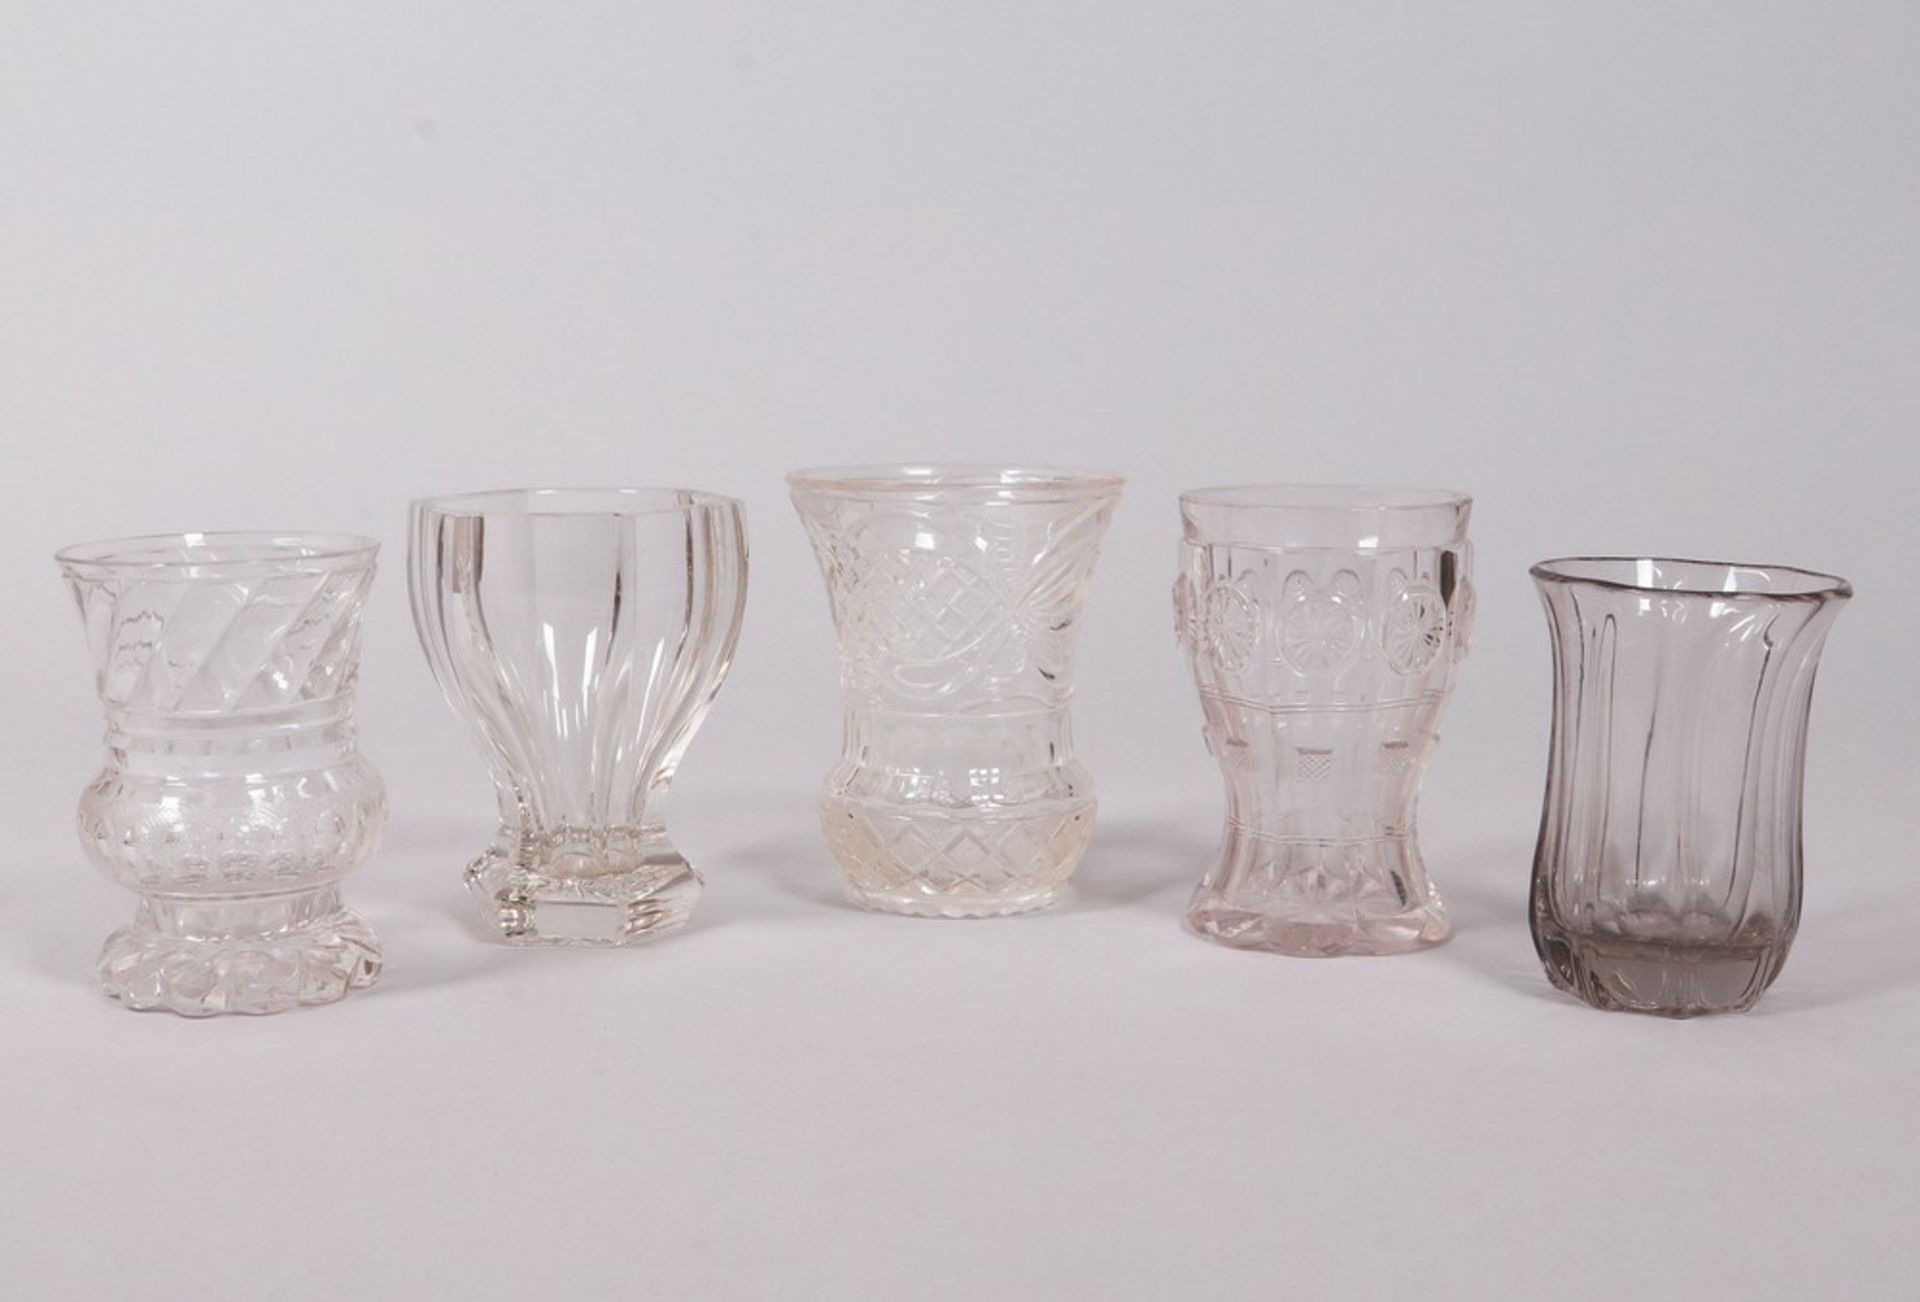 Mixed lot of Biedermeier glasses, 5 pieces, colorless, German, 19th C.